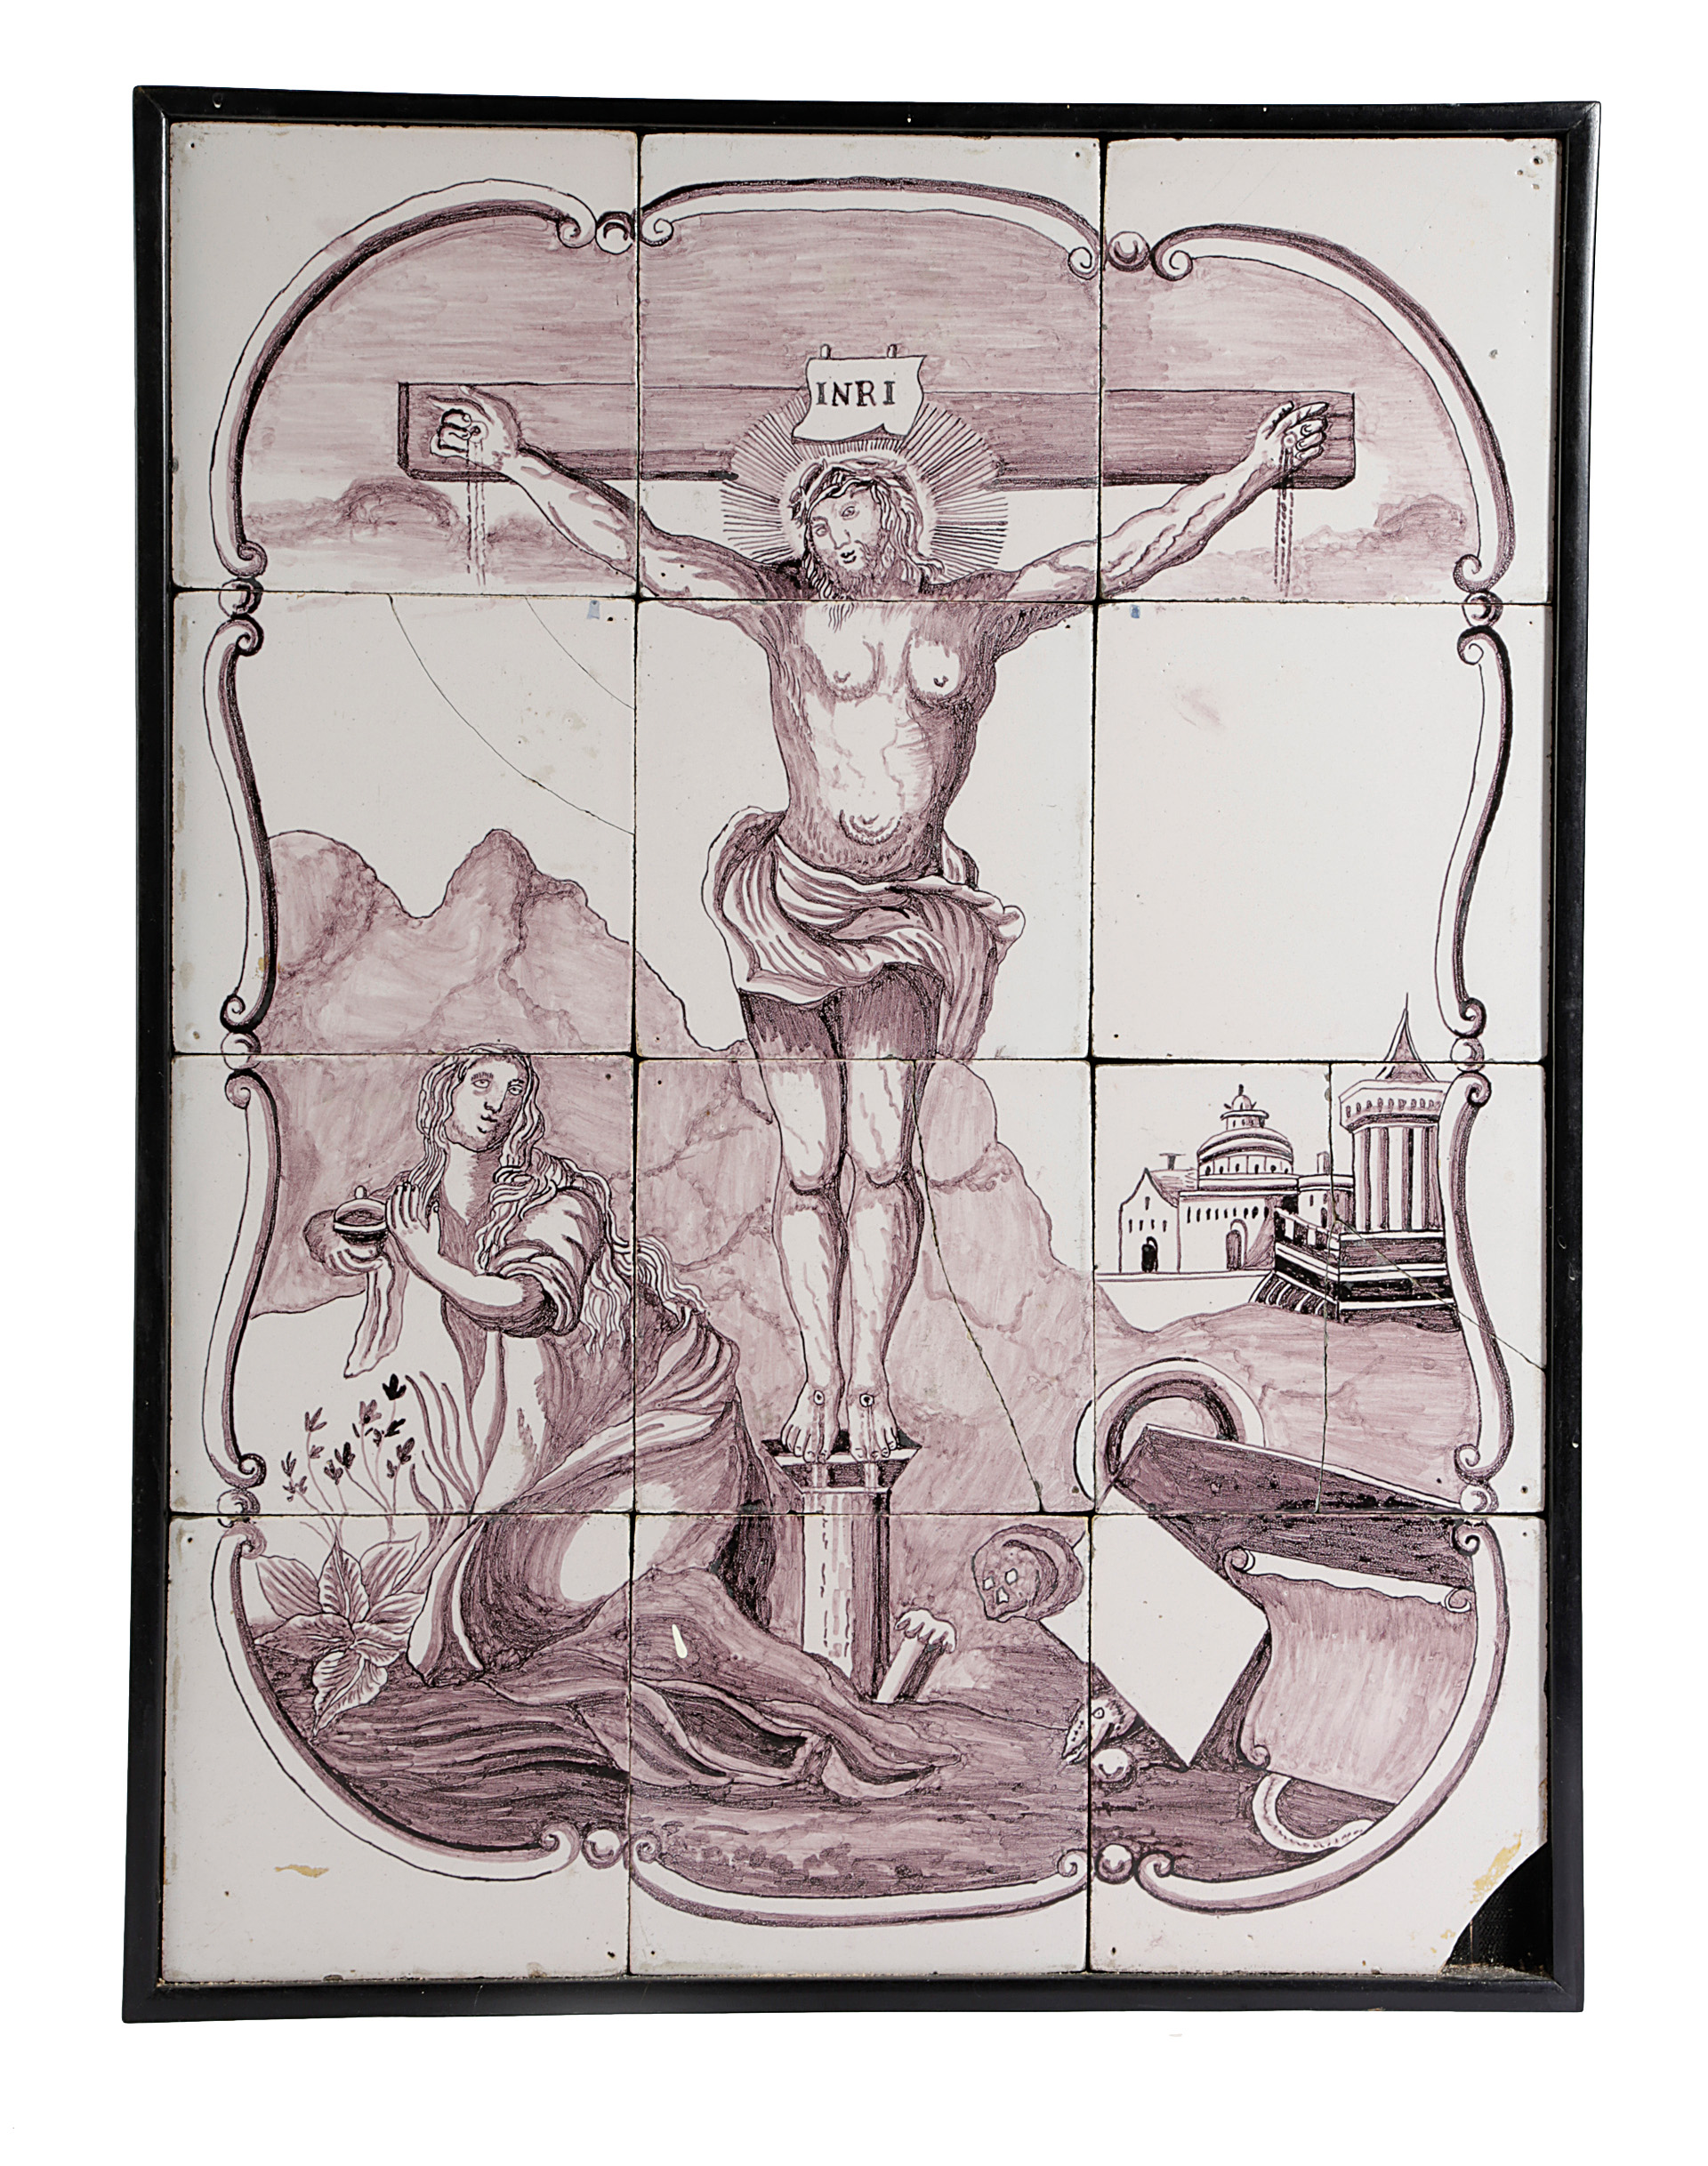 A DUTCH DELFT TILE PANEL 18TH CENTURY painted in manganese with Christ on the Cross with Mary